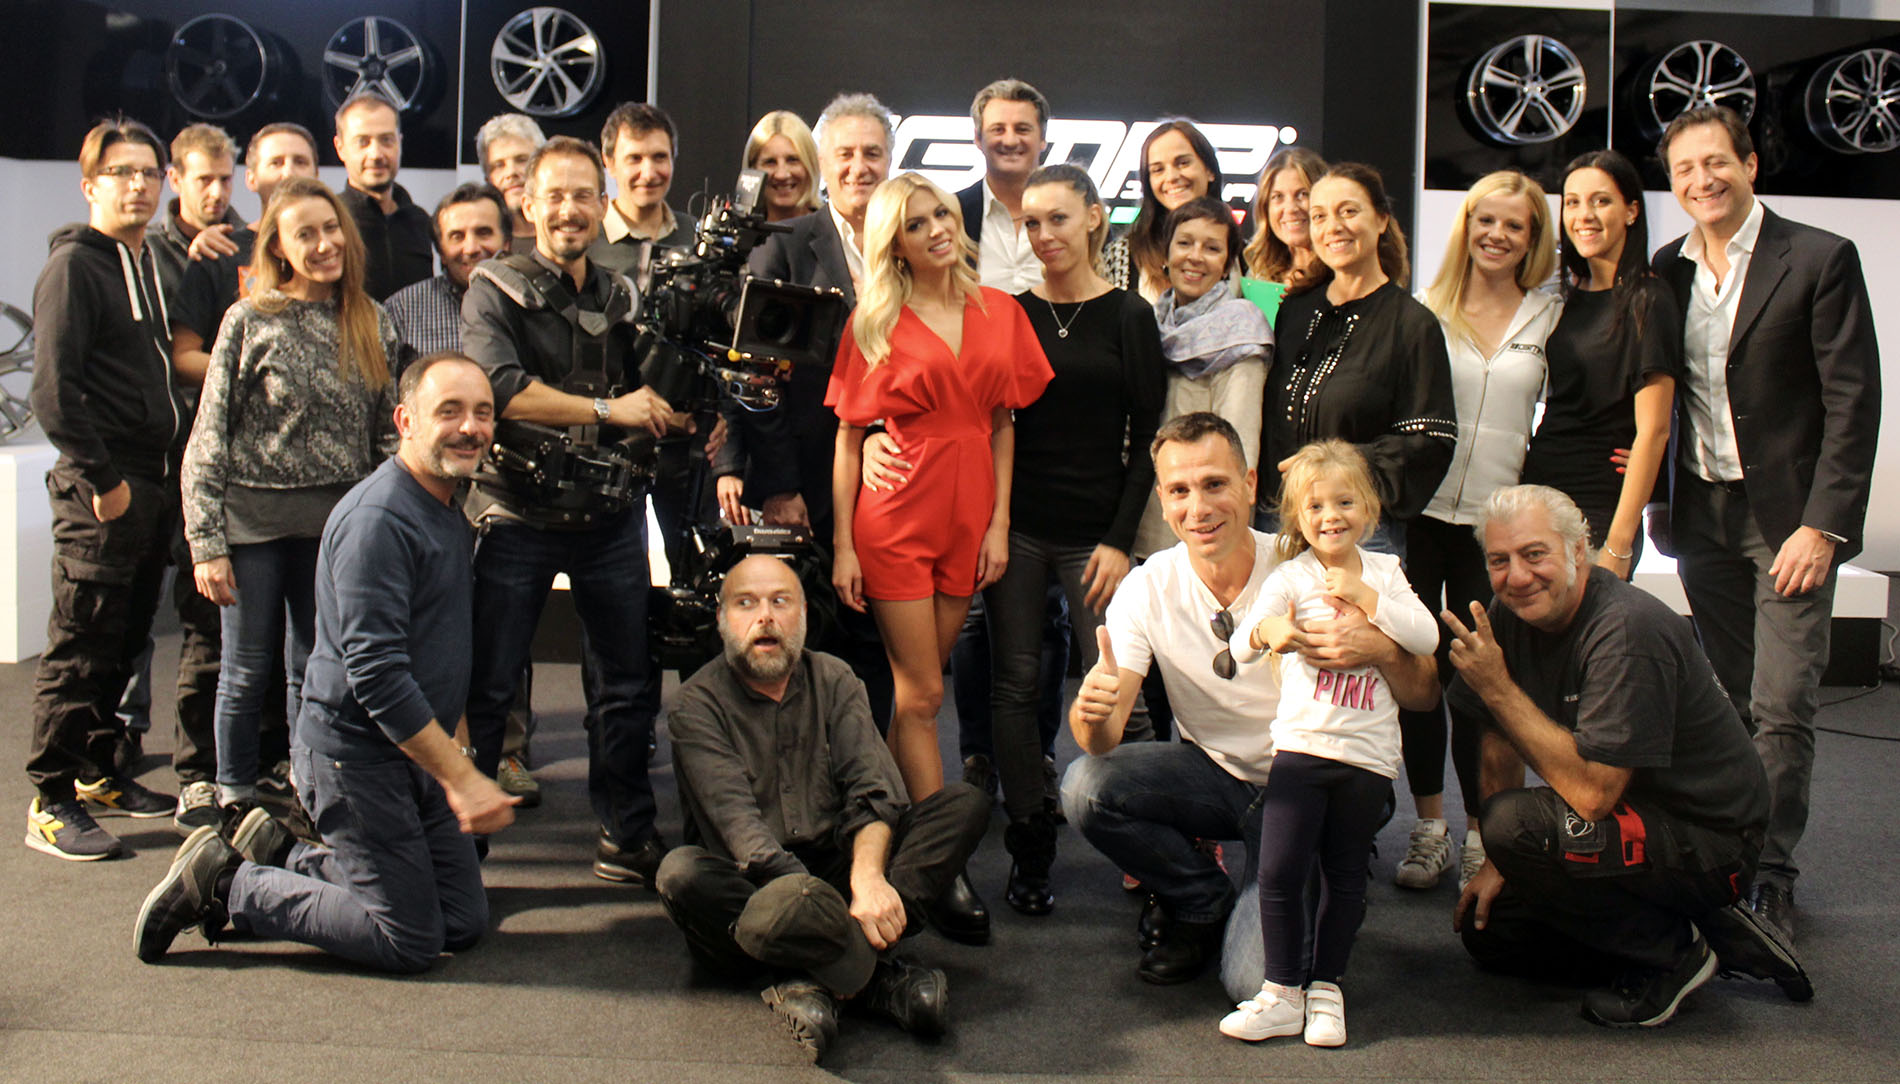 A special thanks to Ludovica Pagani, Max Temporali and Mediaset!